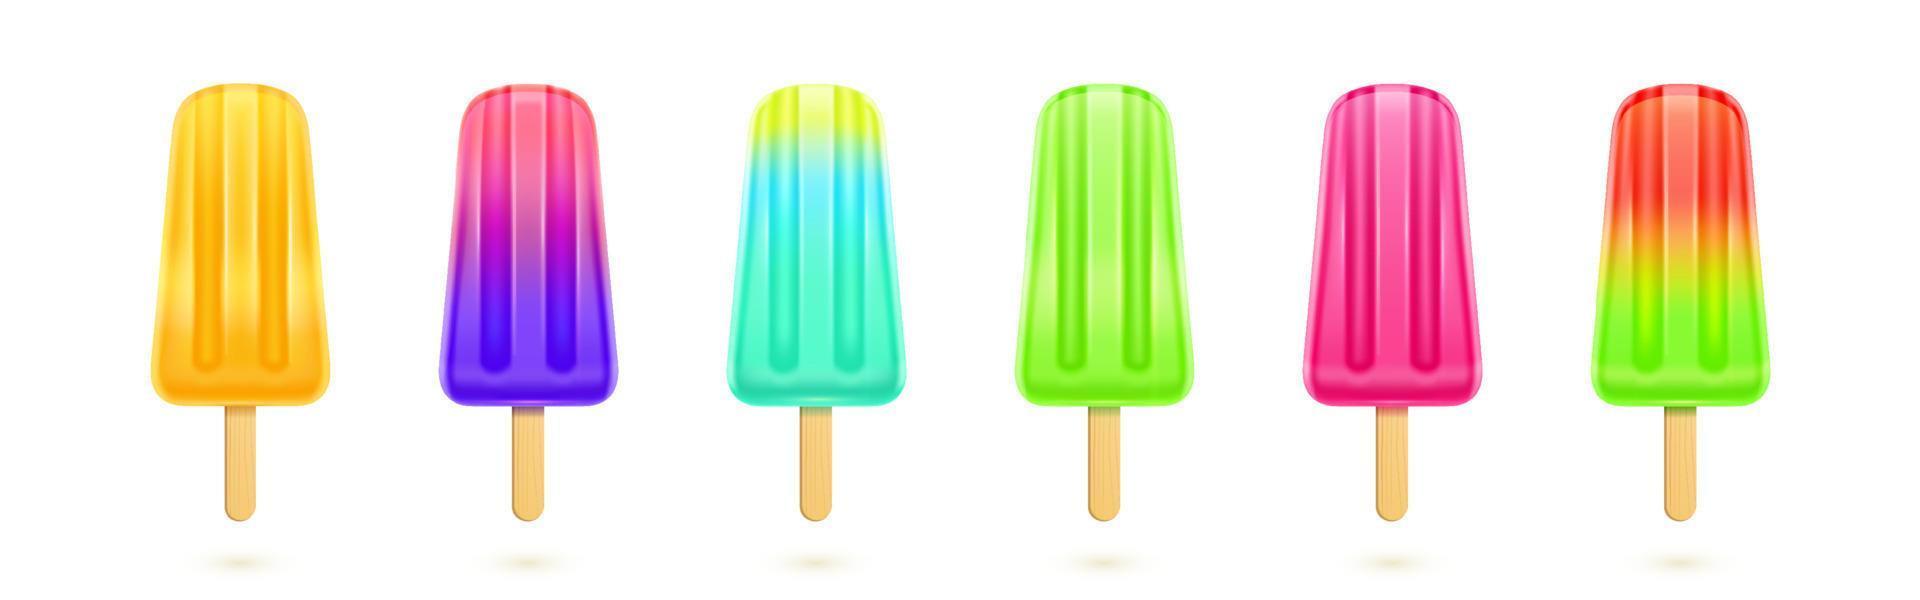 Fruit popsicle, colorful ice cream on wooden stick vector